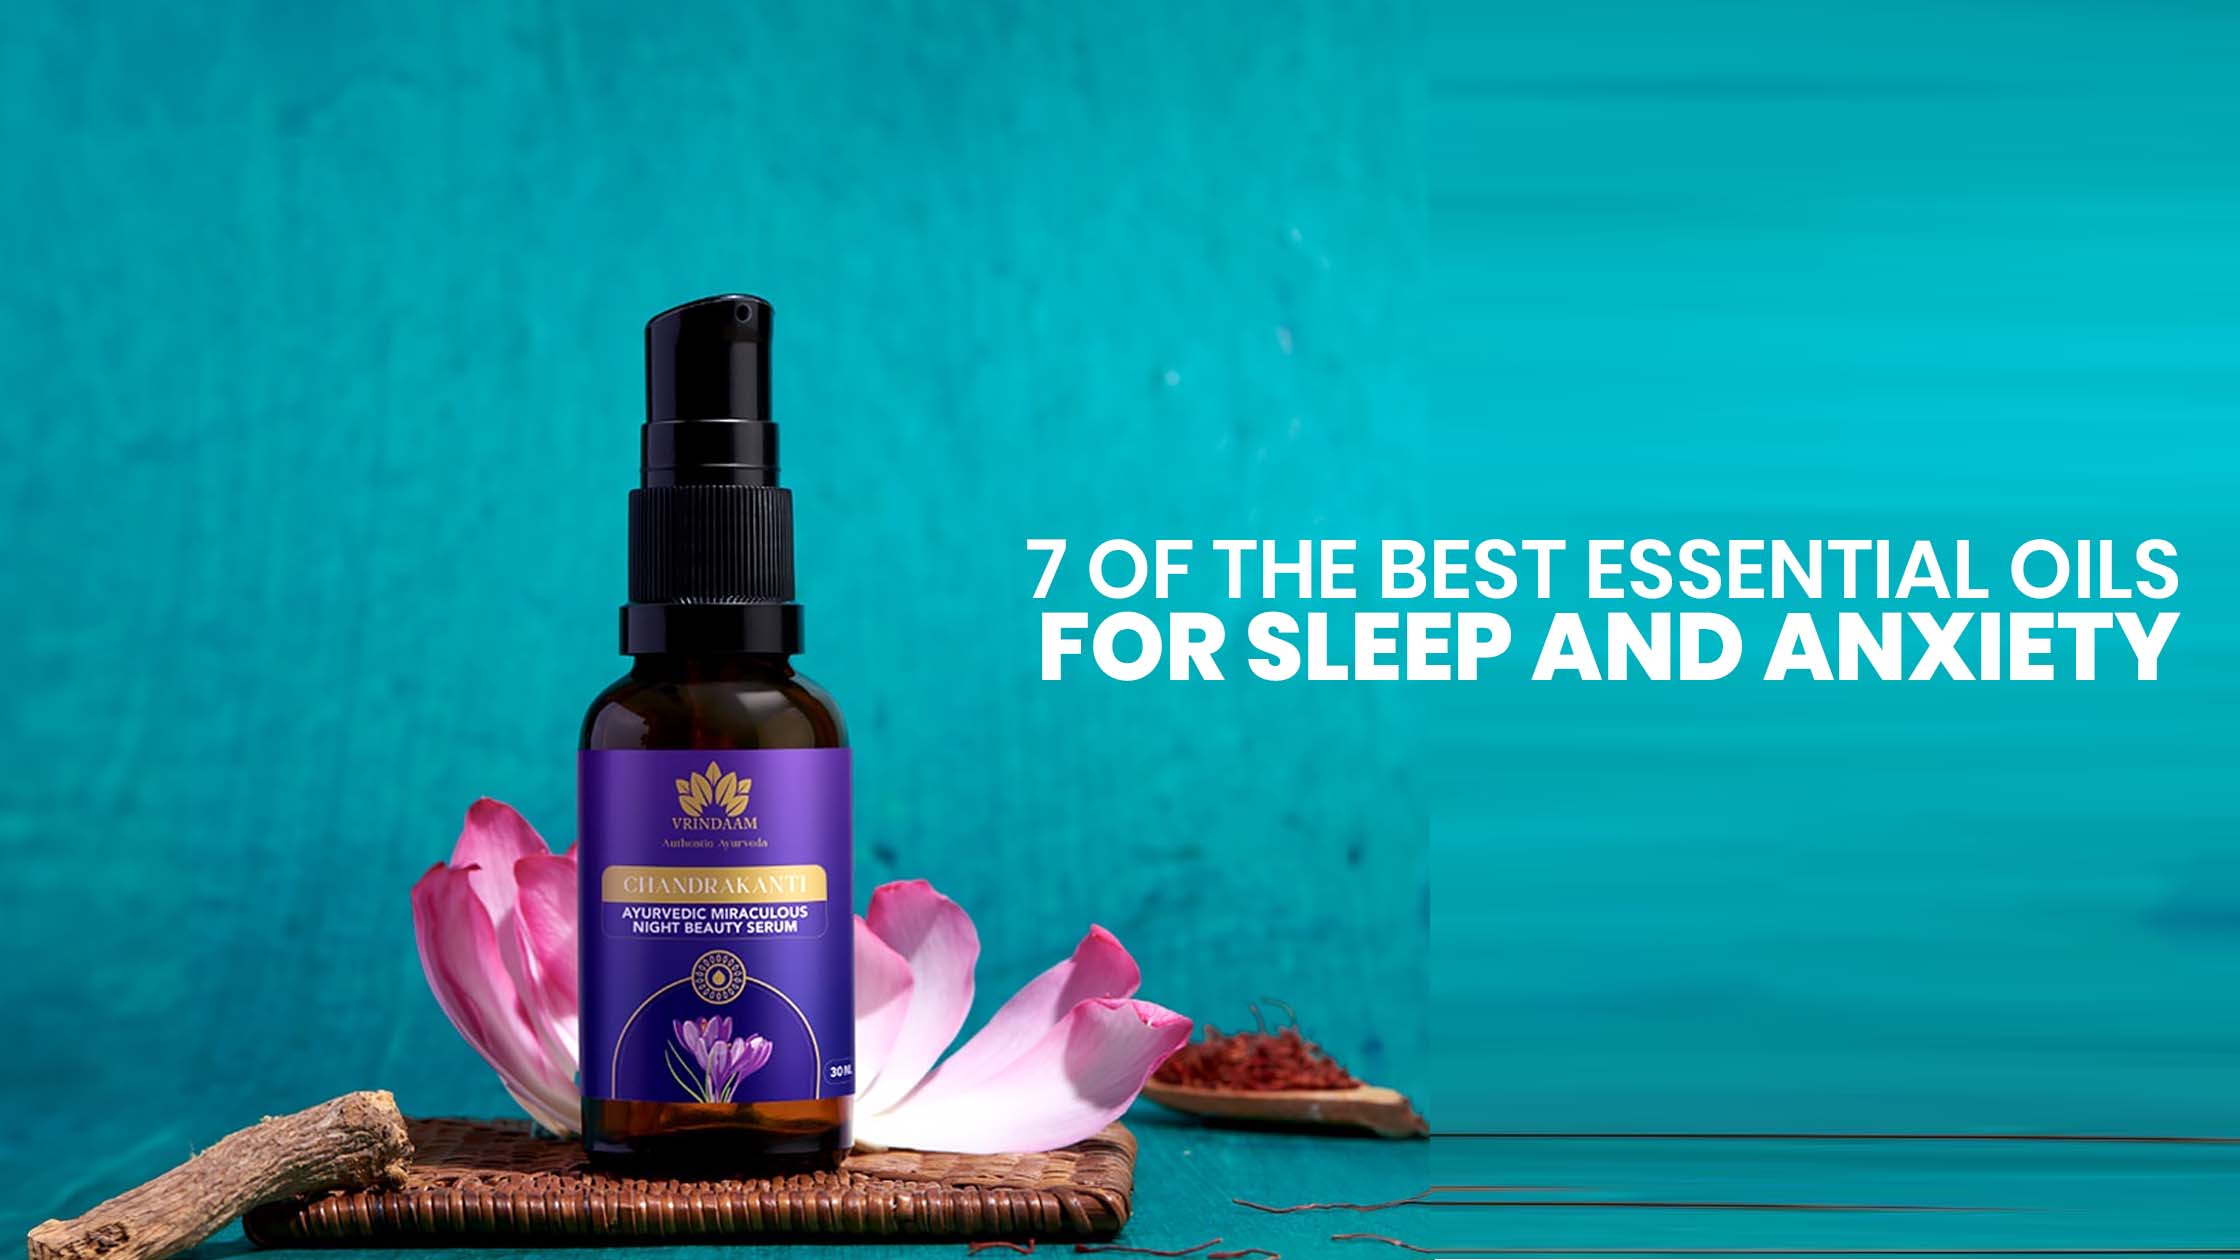 7 of the best essential oils for sleep and anxiety